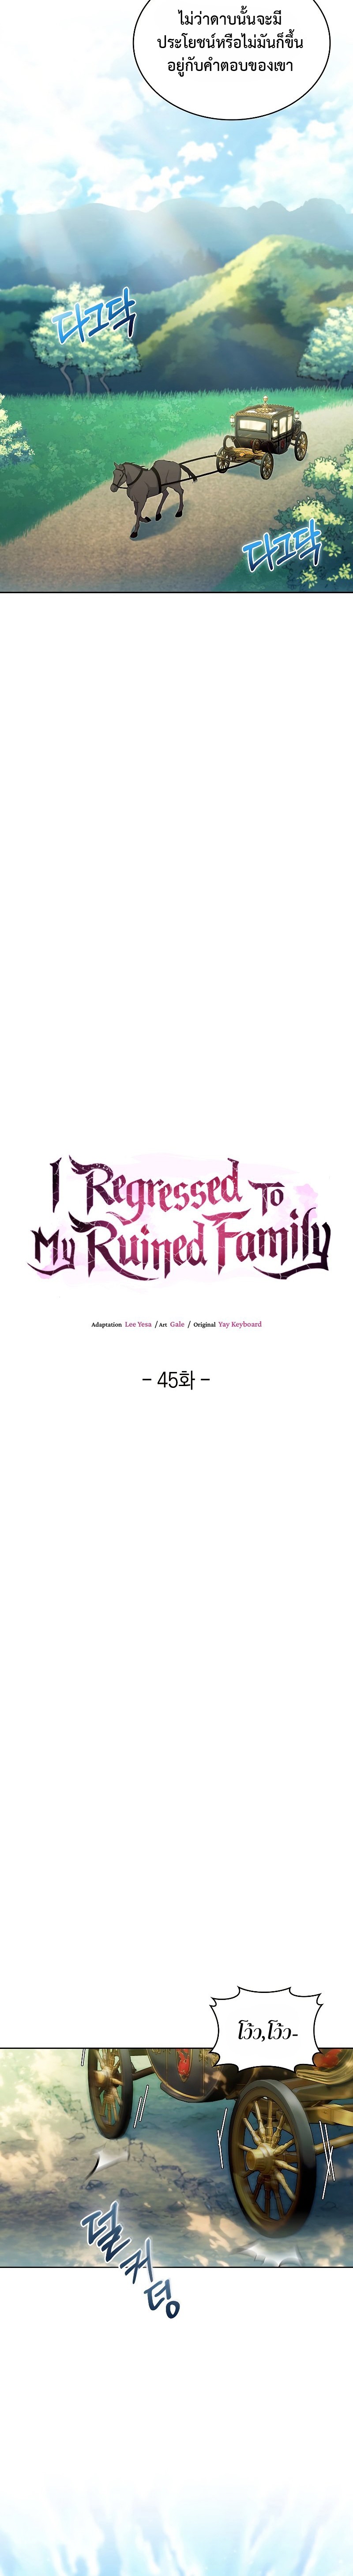 i regressed to my ruined family 45.04